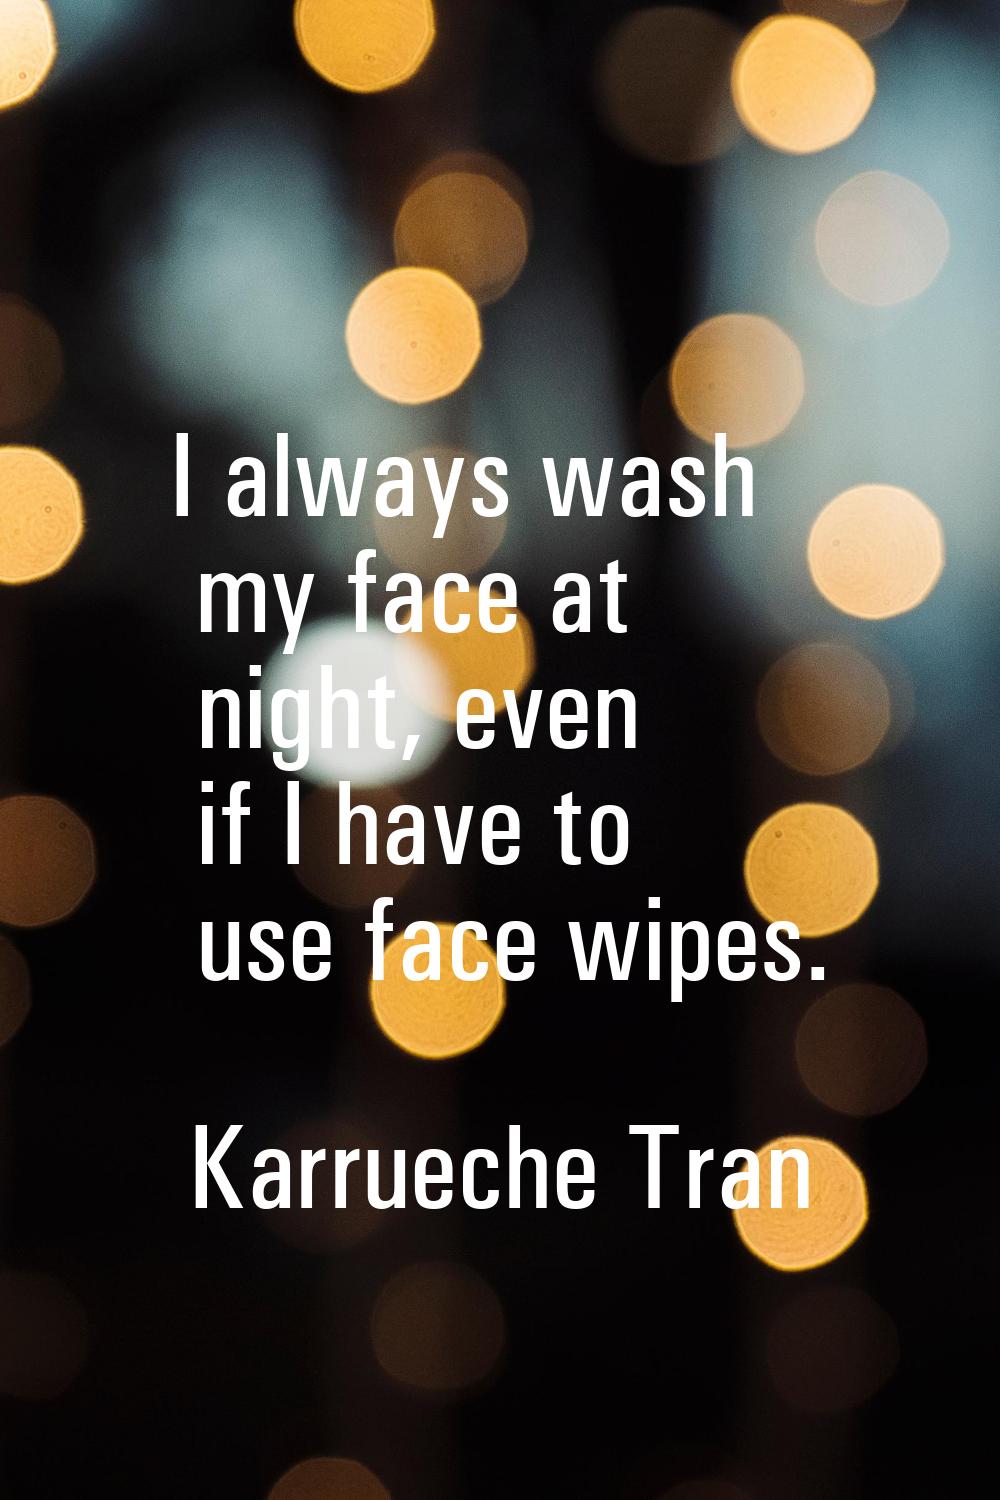 I always wash my face at night, even if I have to use face wipes.